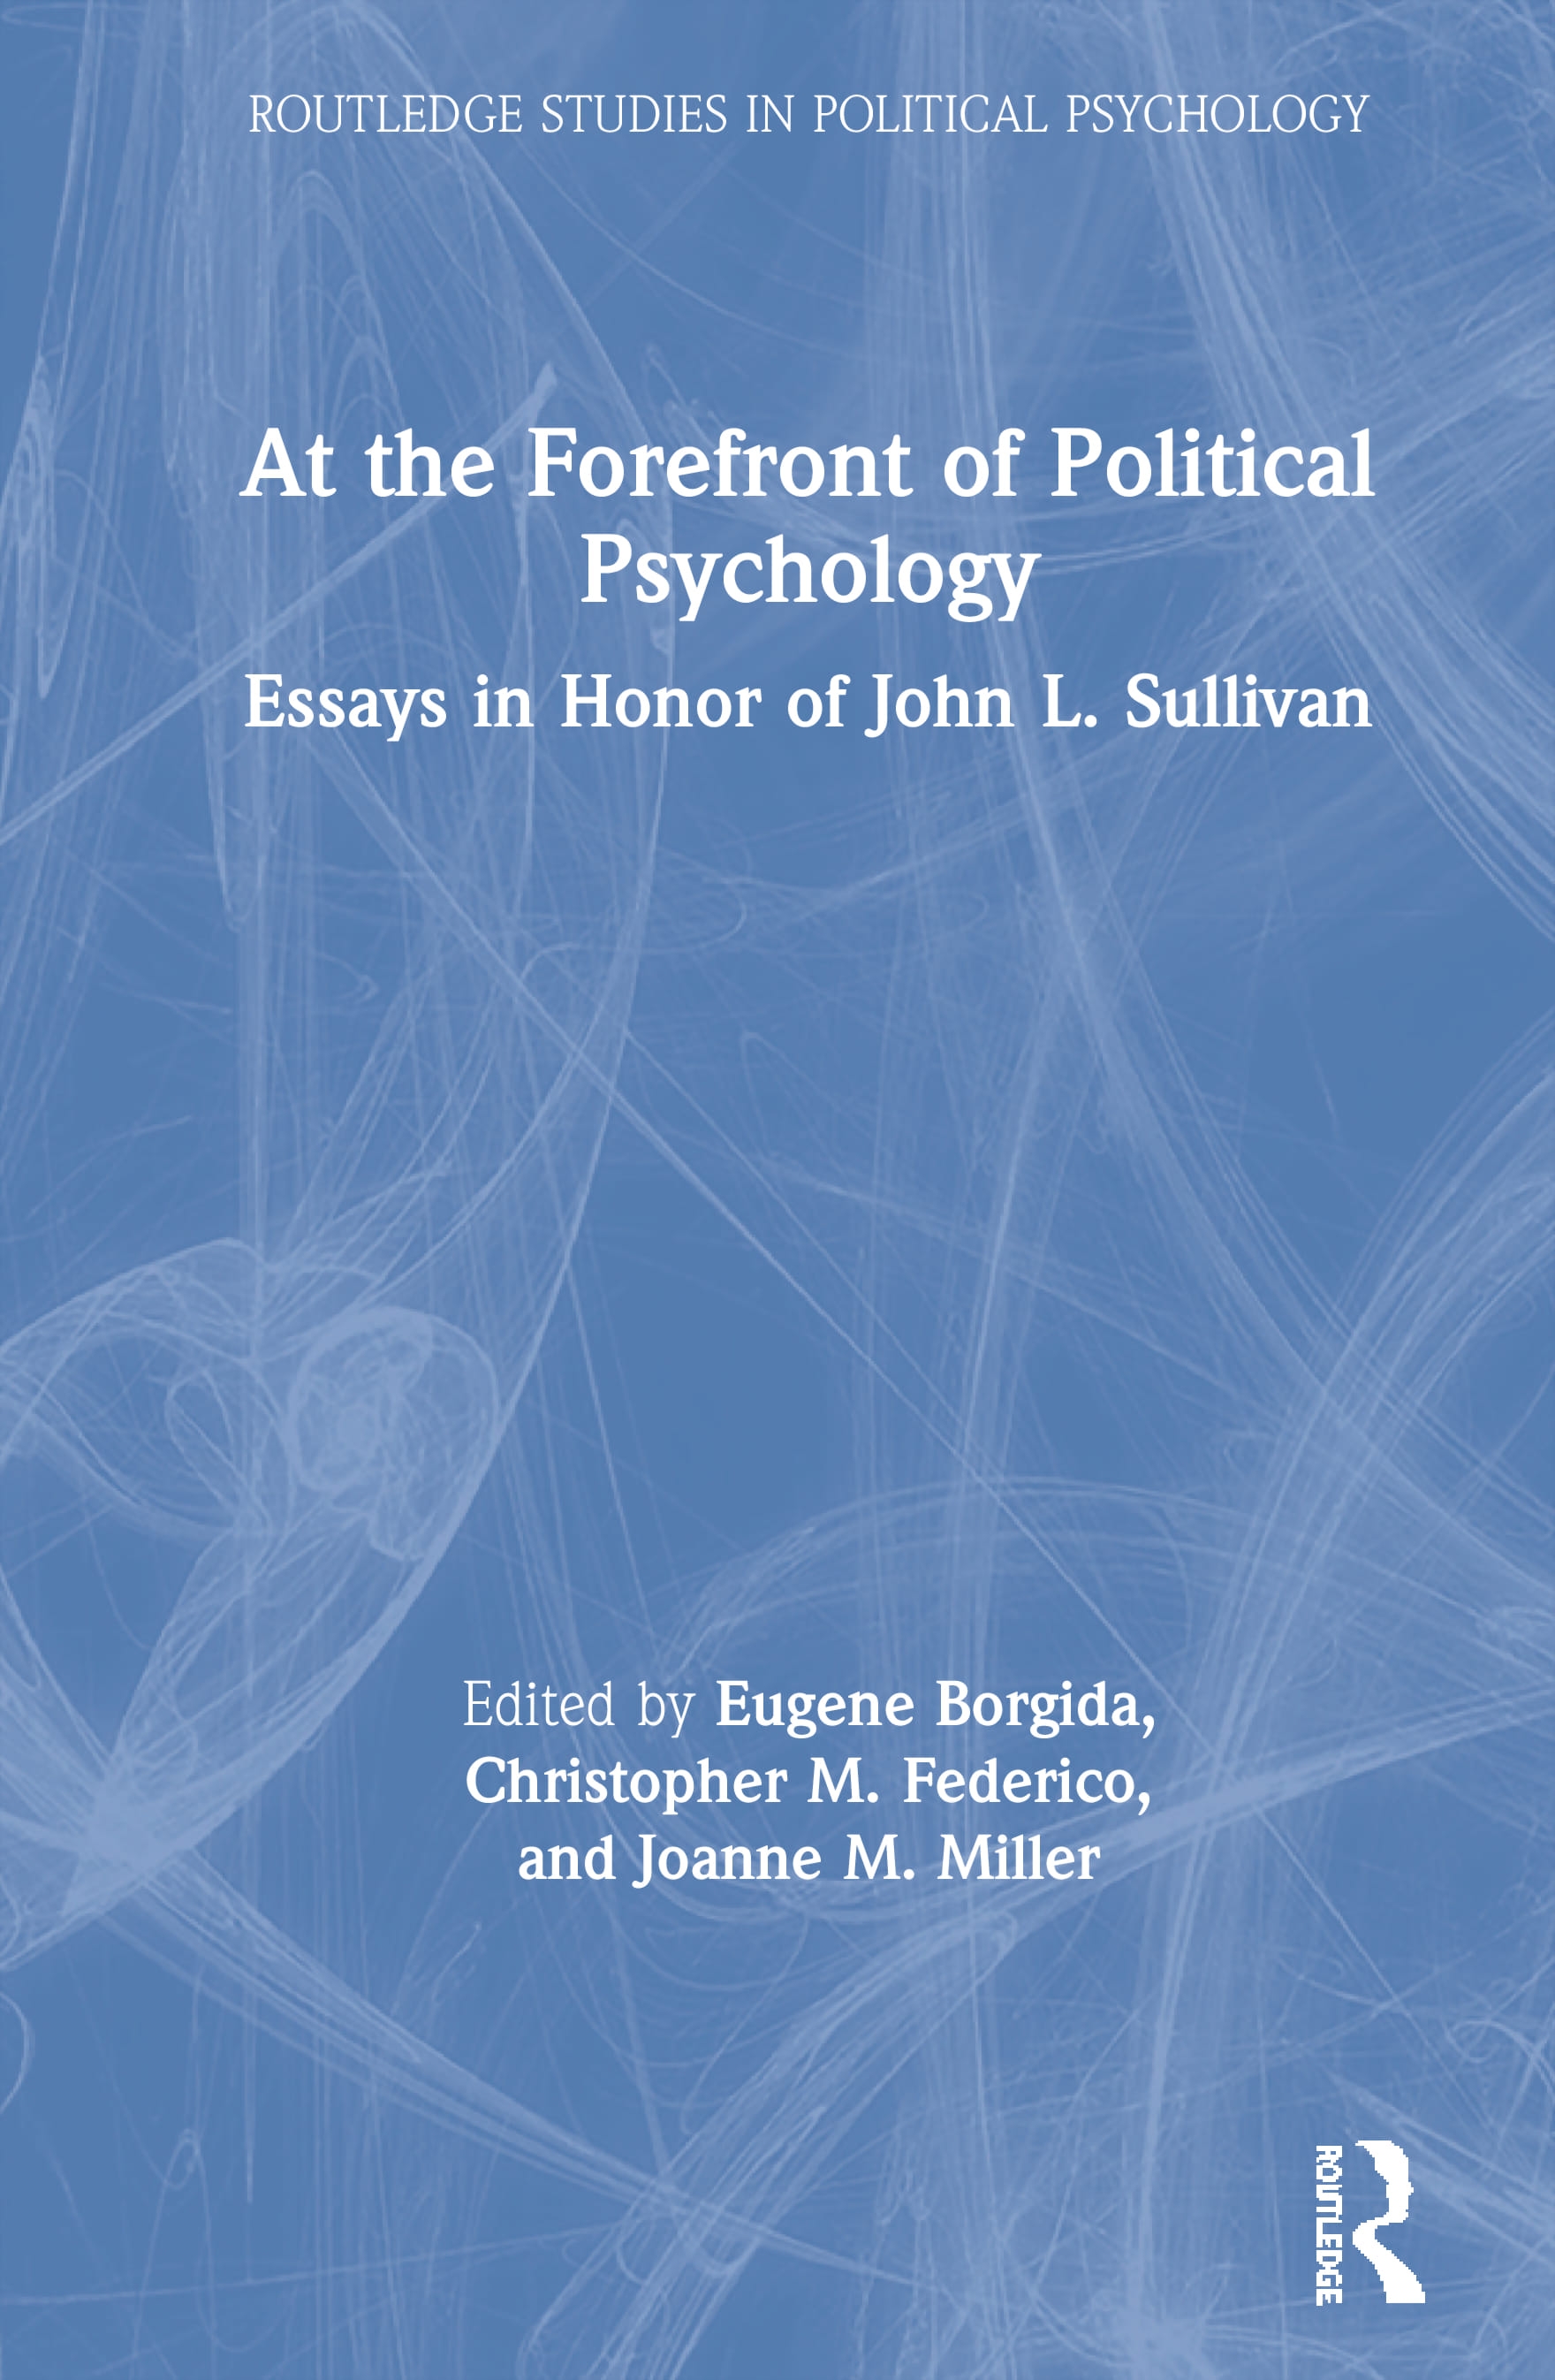 At the Forefront of Political Psychology: Essays in Honor of John L. Sullivan